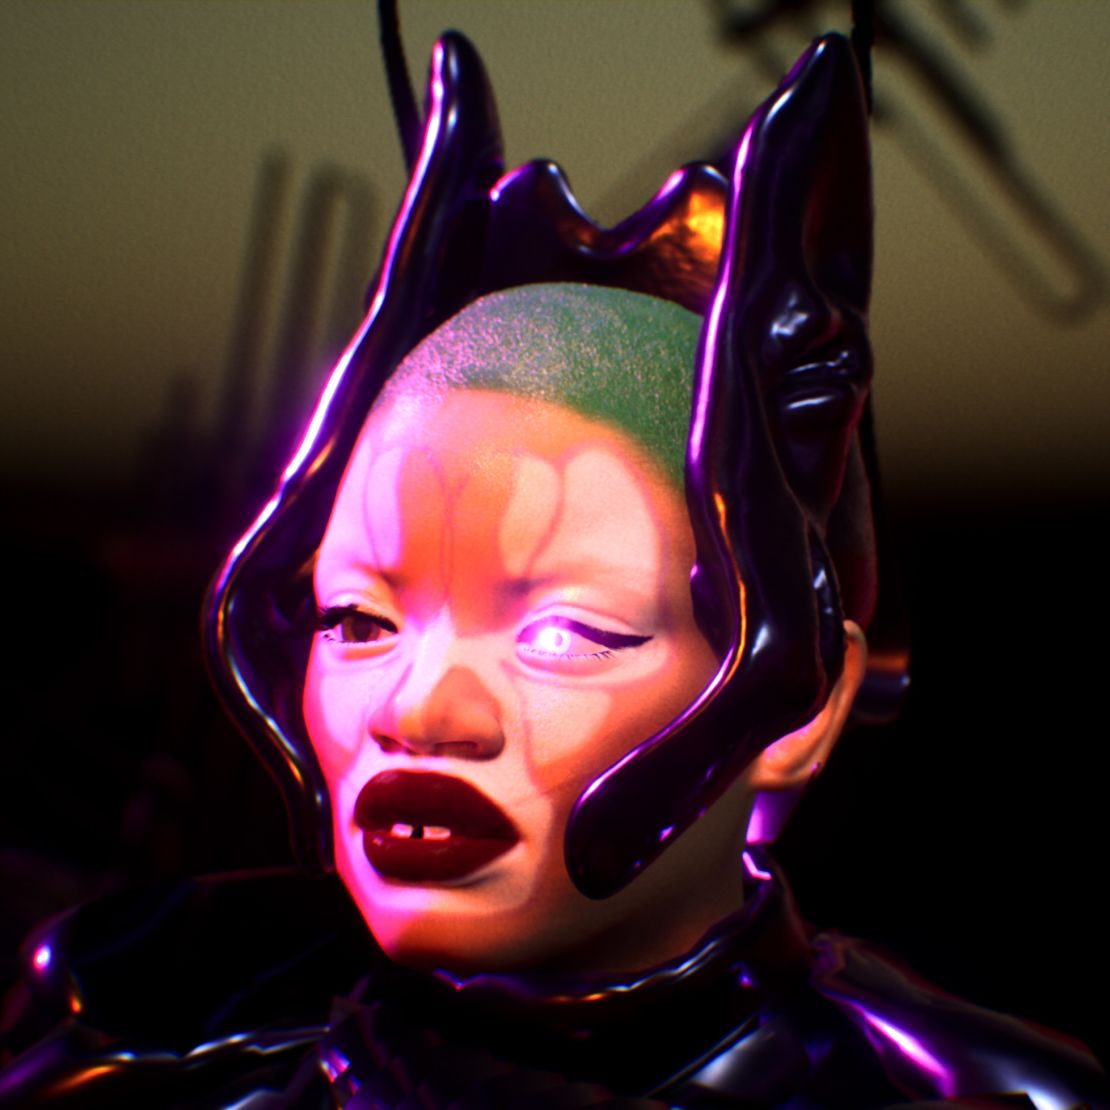 A still of Slick Woods for a Dazed Beauty video, with creative direction by Isamaya Ffrench and Ben Freeman, and animated by Rick Farin